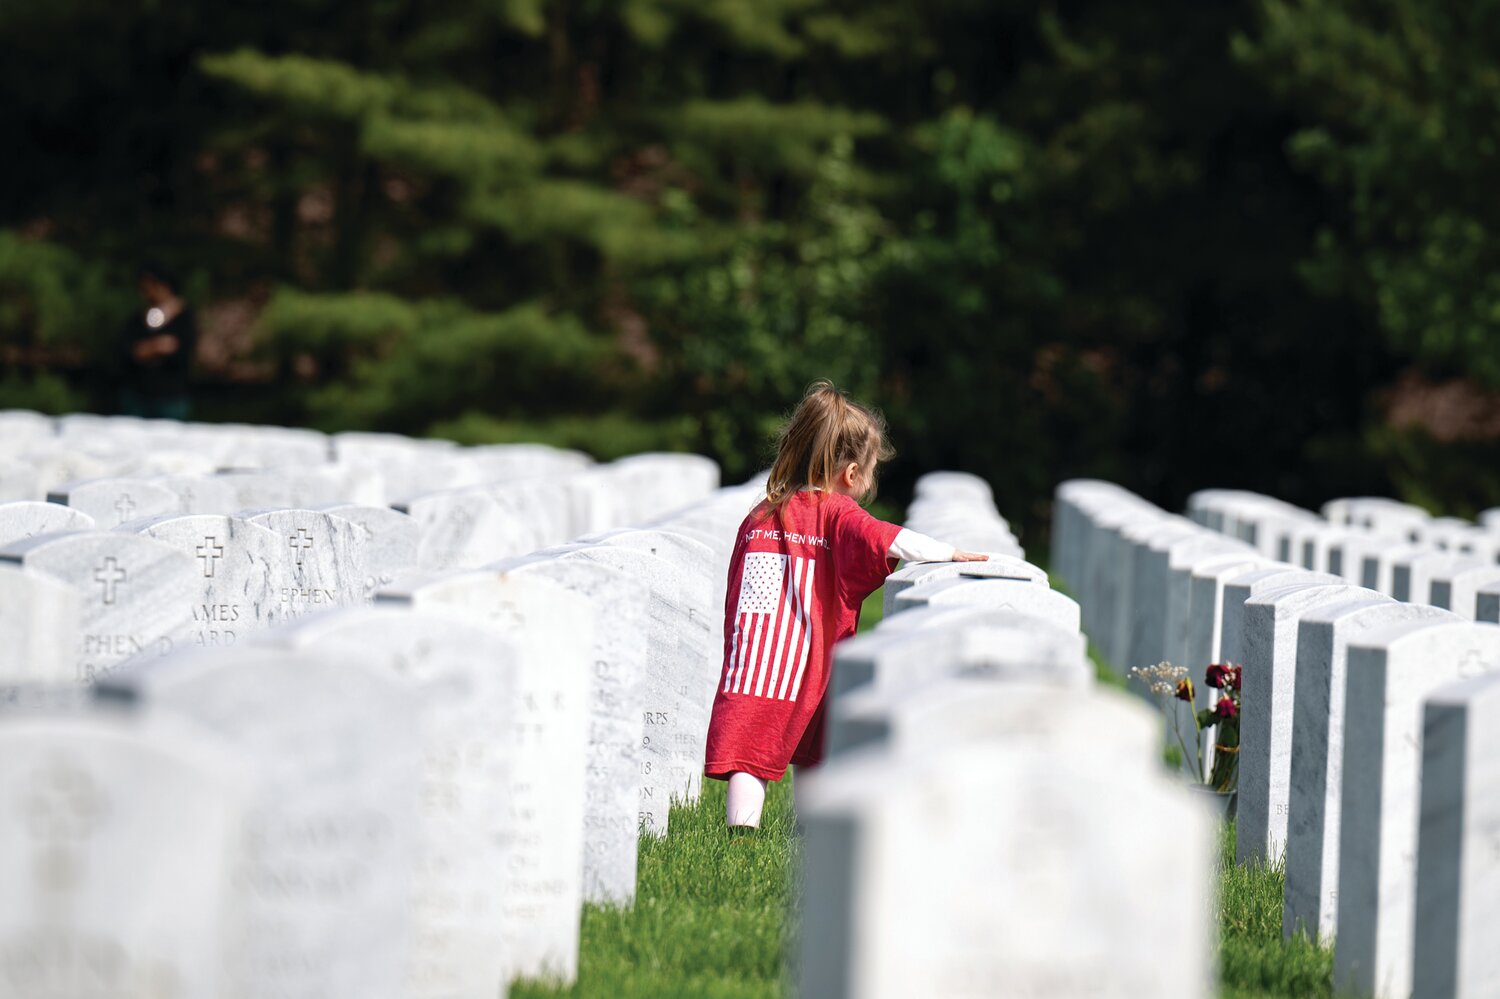 Sydney Heffron, 4, of New York, who participated in The Honor Project event with her uncle and aunt, Brian and Lauren Joyce of Doylestown, places her hand on one of the gravestones at Washington Crossing National Cemetery.